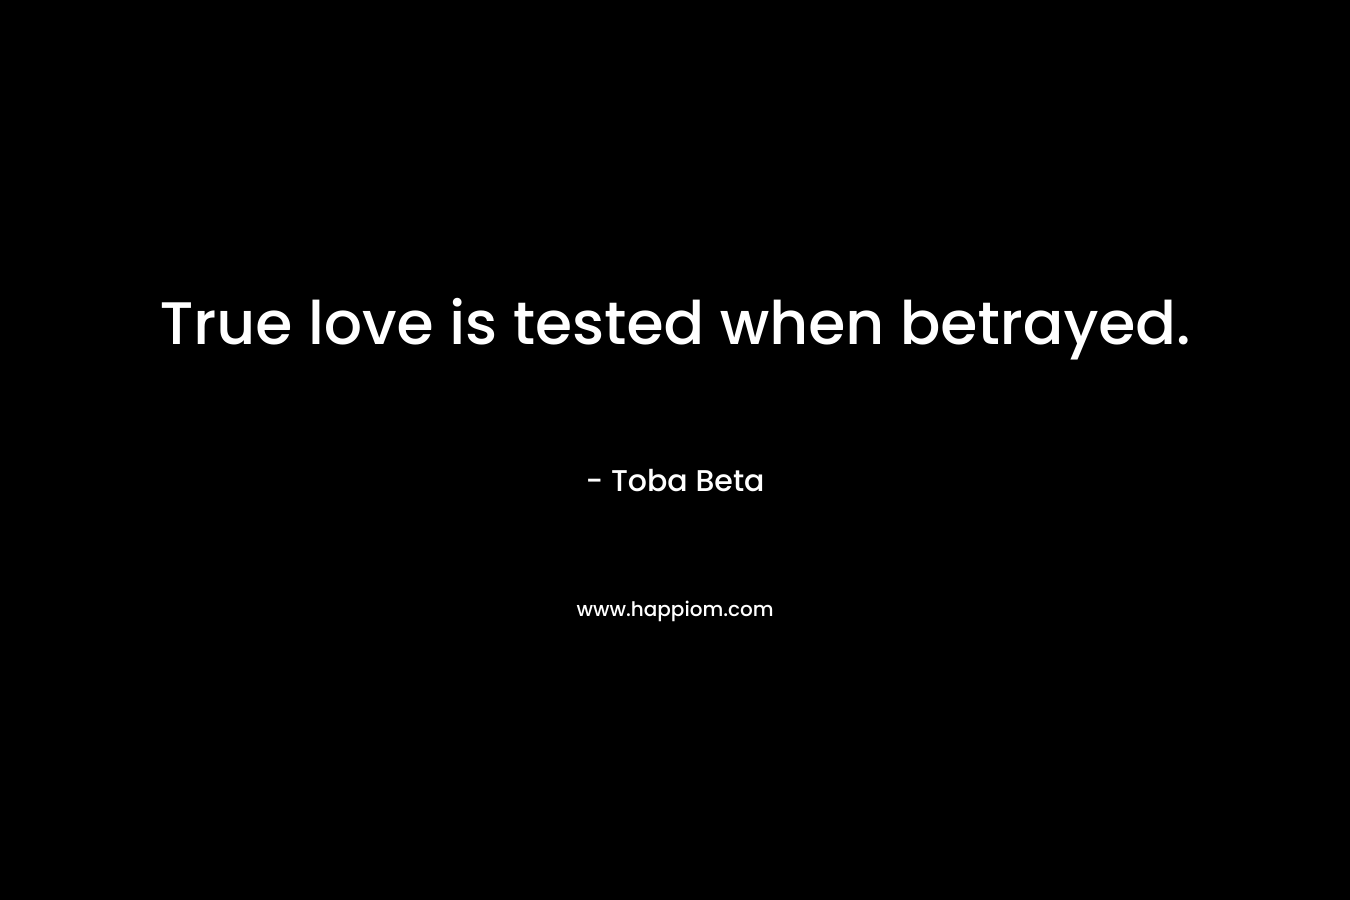 True love is tested when betrayed. – Toba Beta